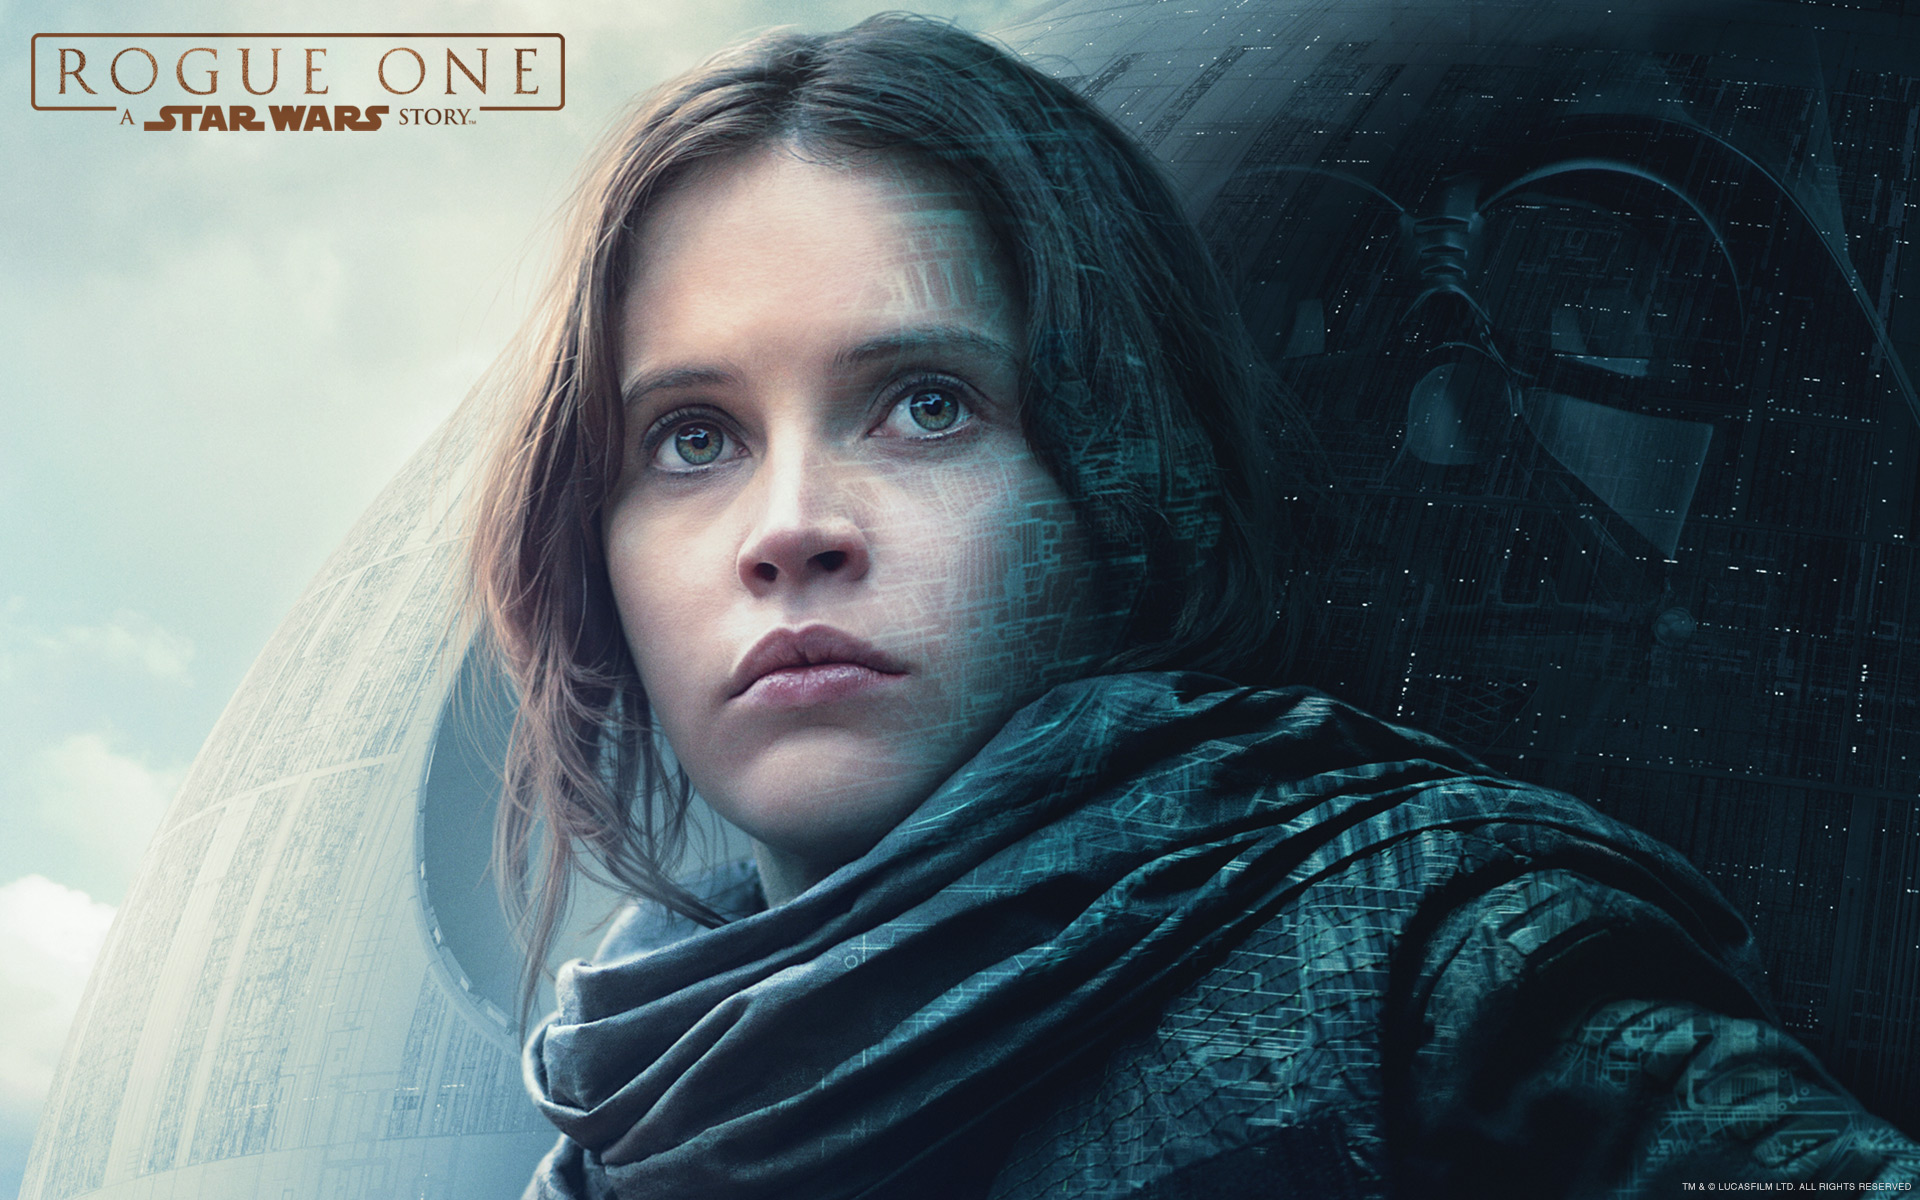 Rogue One: A Star Wars Story review [Spoiler free]